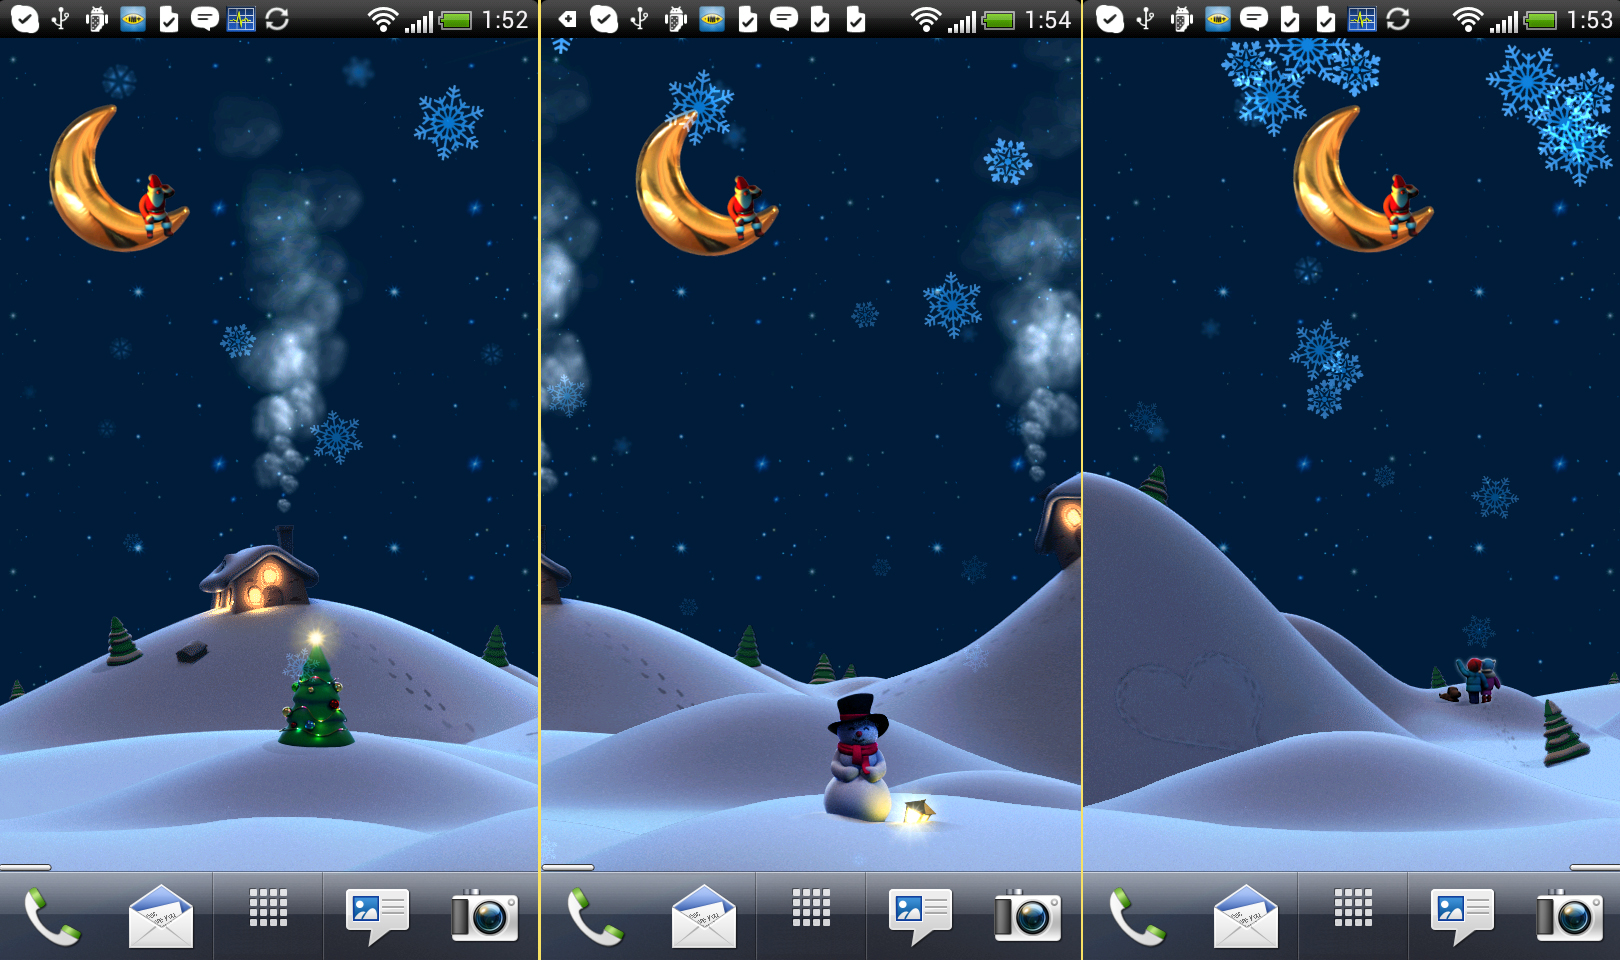 Our Work For Android - Live Christmas Wallpaper For Iphone 5 , HD Wallpaper & Backgrounds